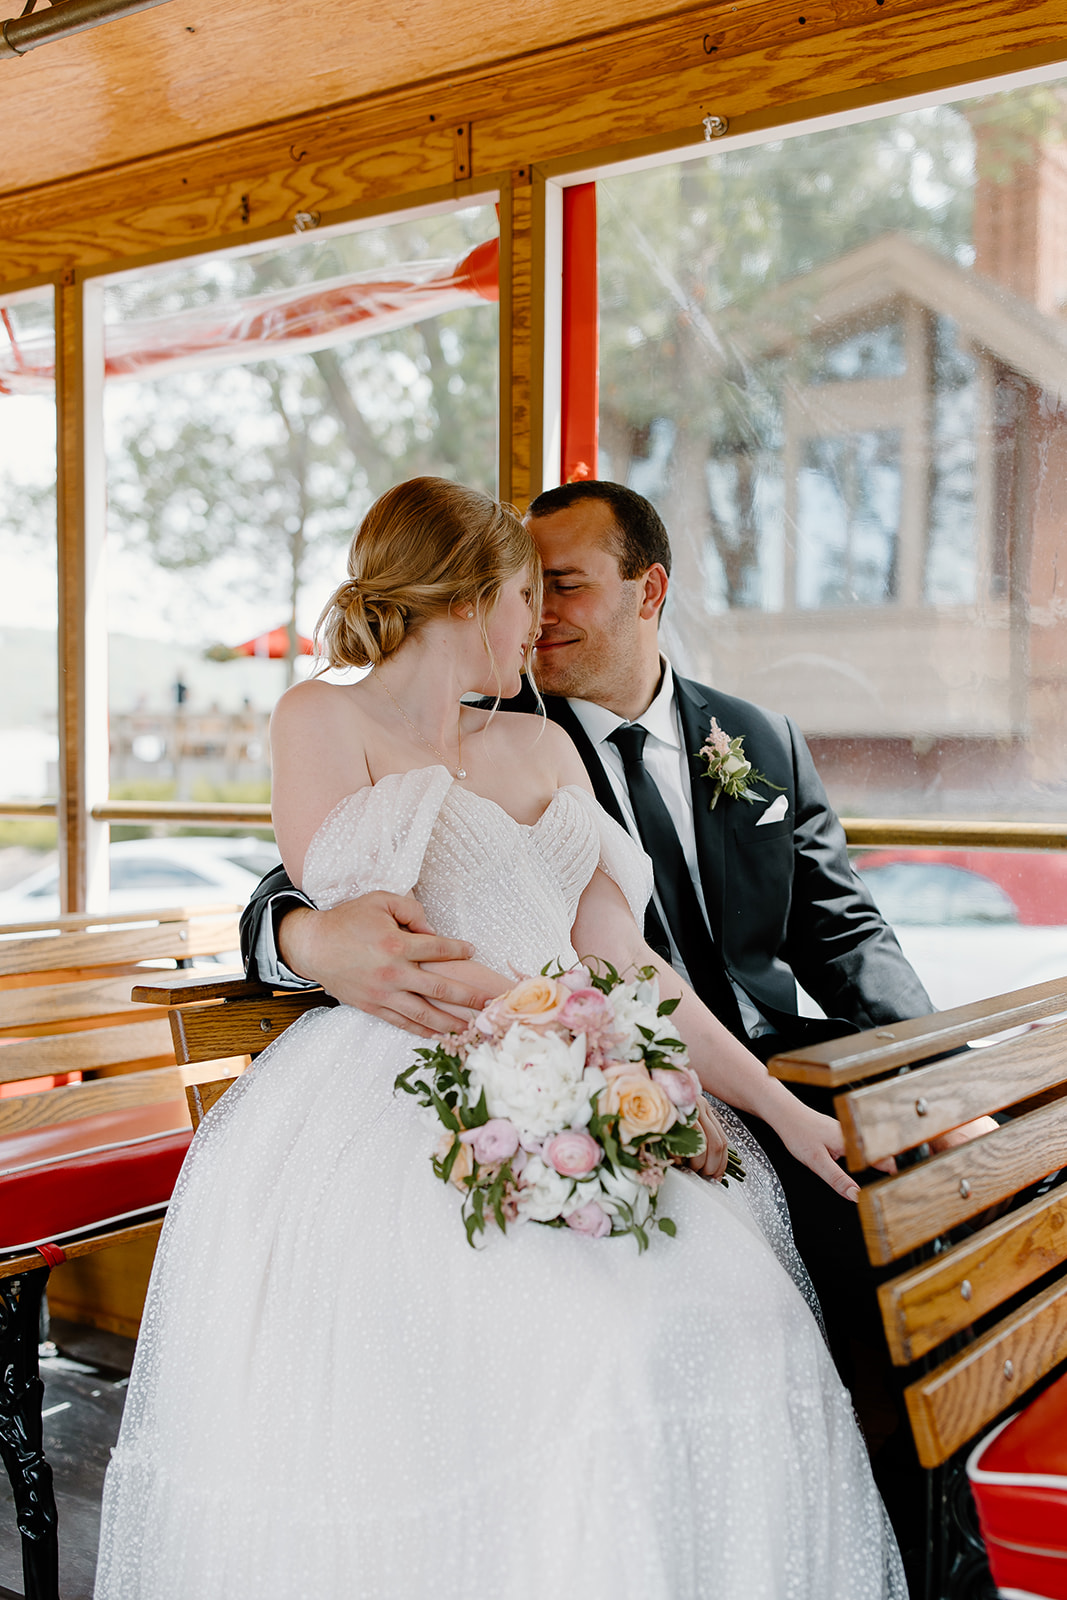 Bride and groom sharing a kiss on a trolley